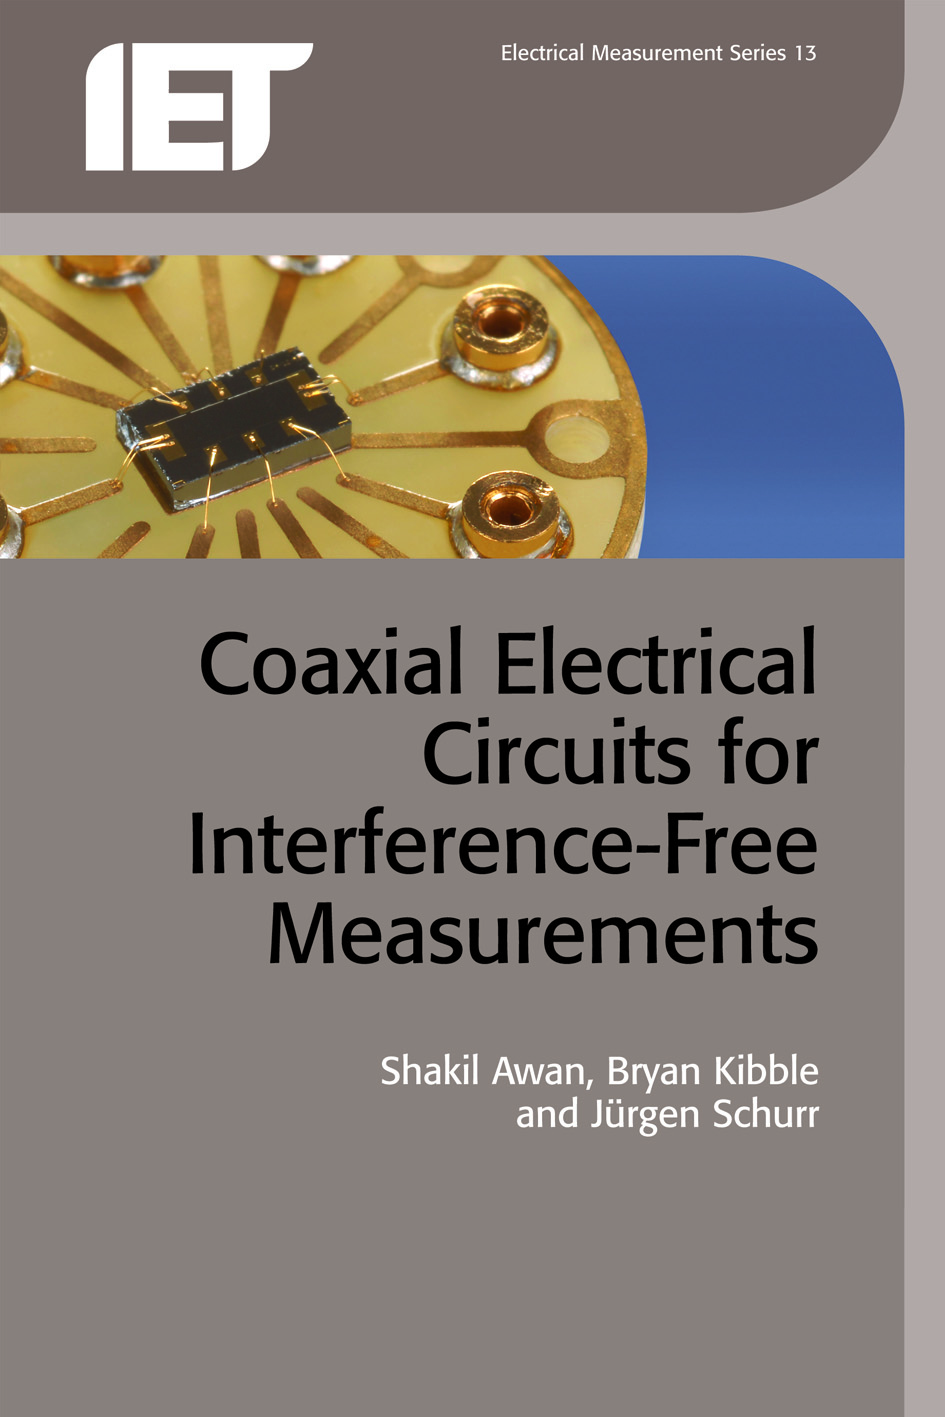 Coaxial Electrical Circuits for Interference-Free Measurements